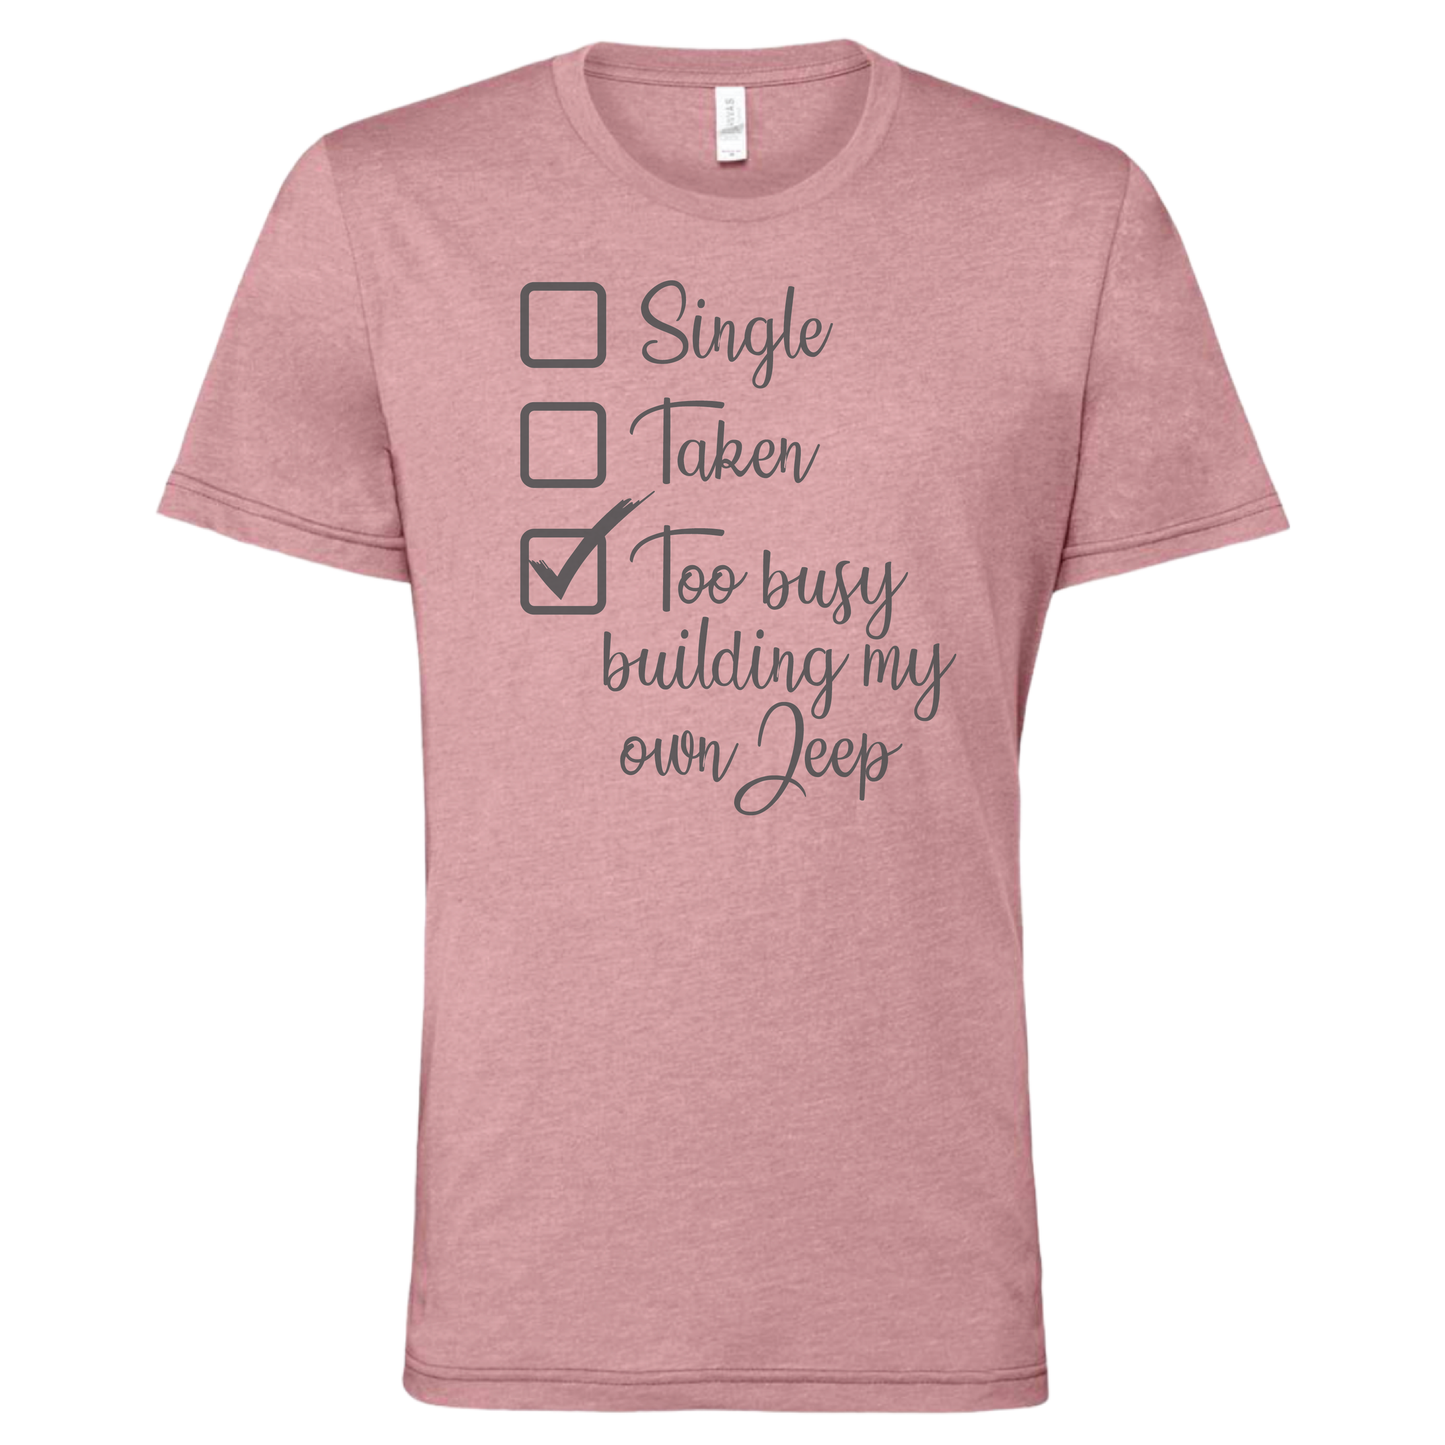 Too Busy - Shirt, Tank Top, Long Sleeve or Hoodie - Available in Multiple Colors